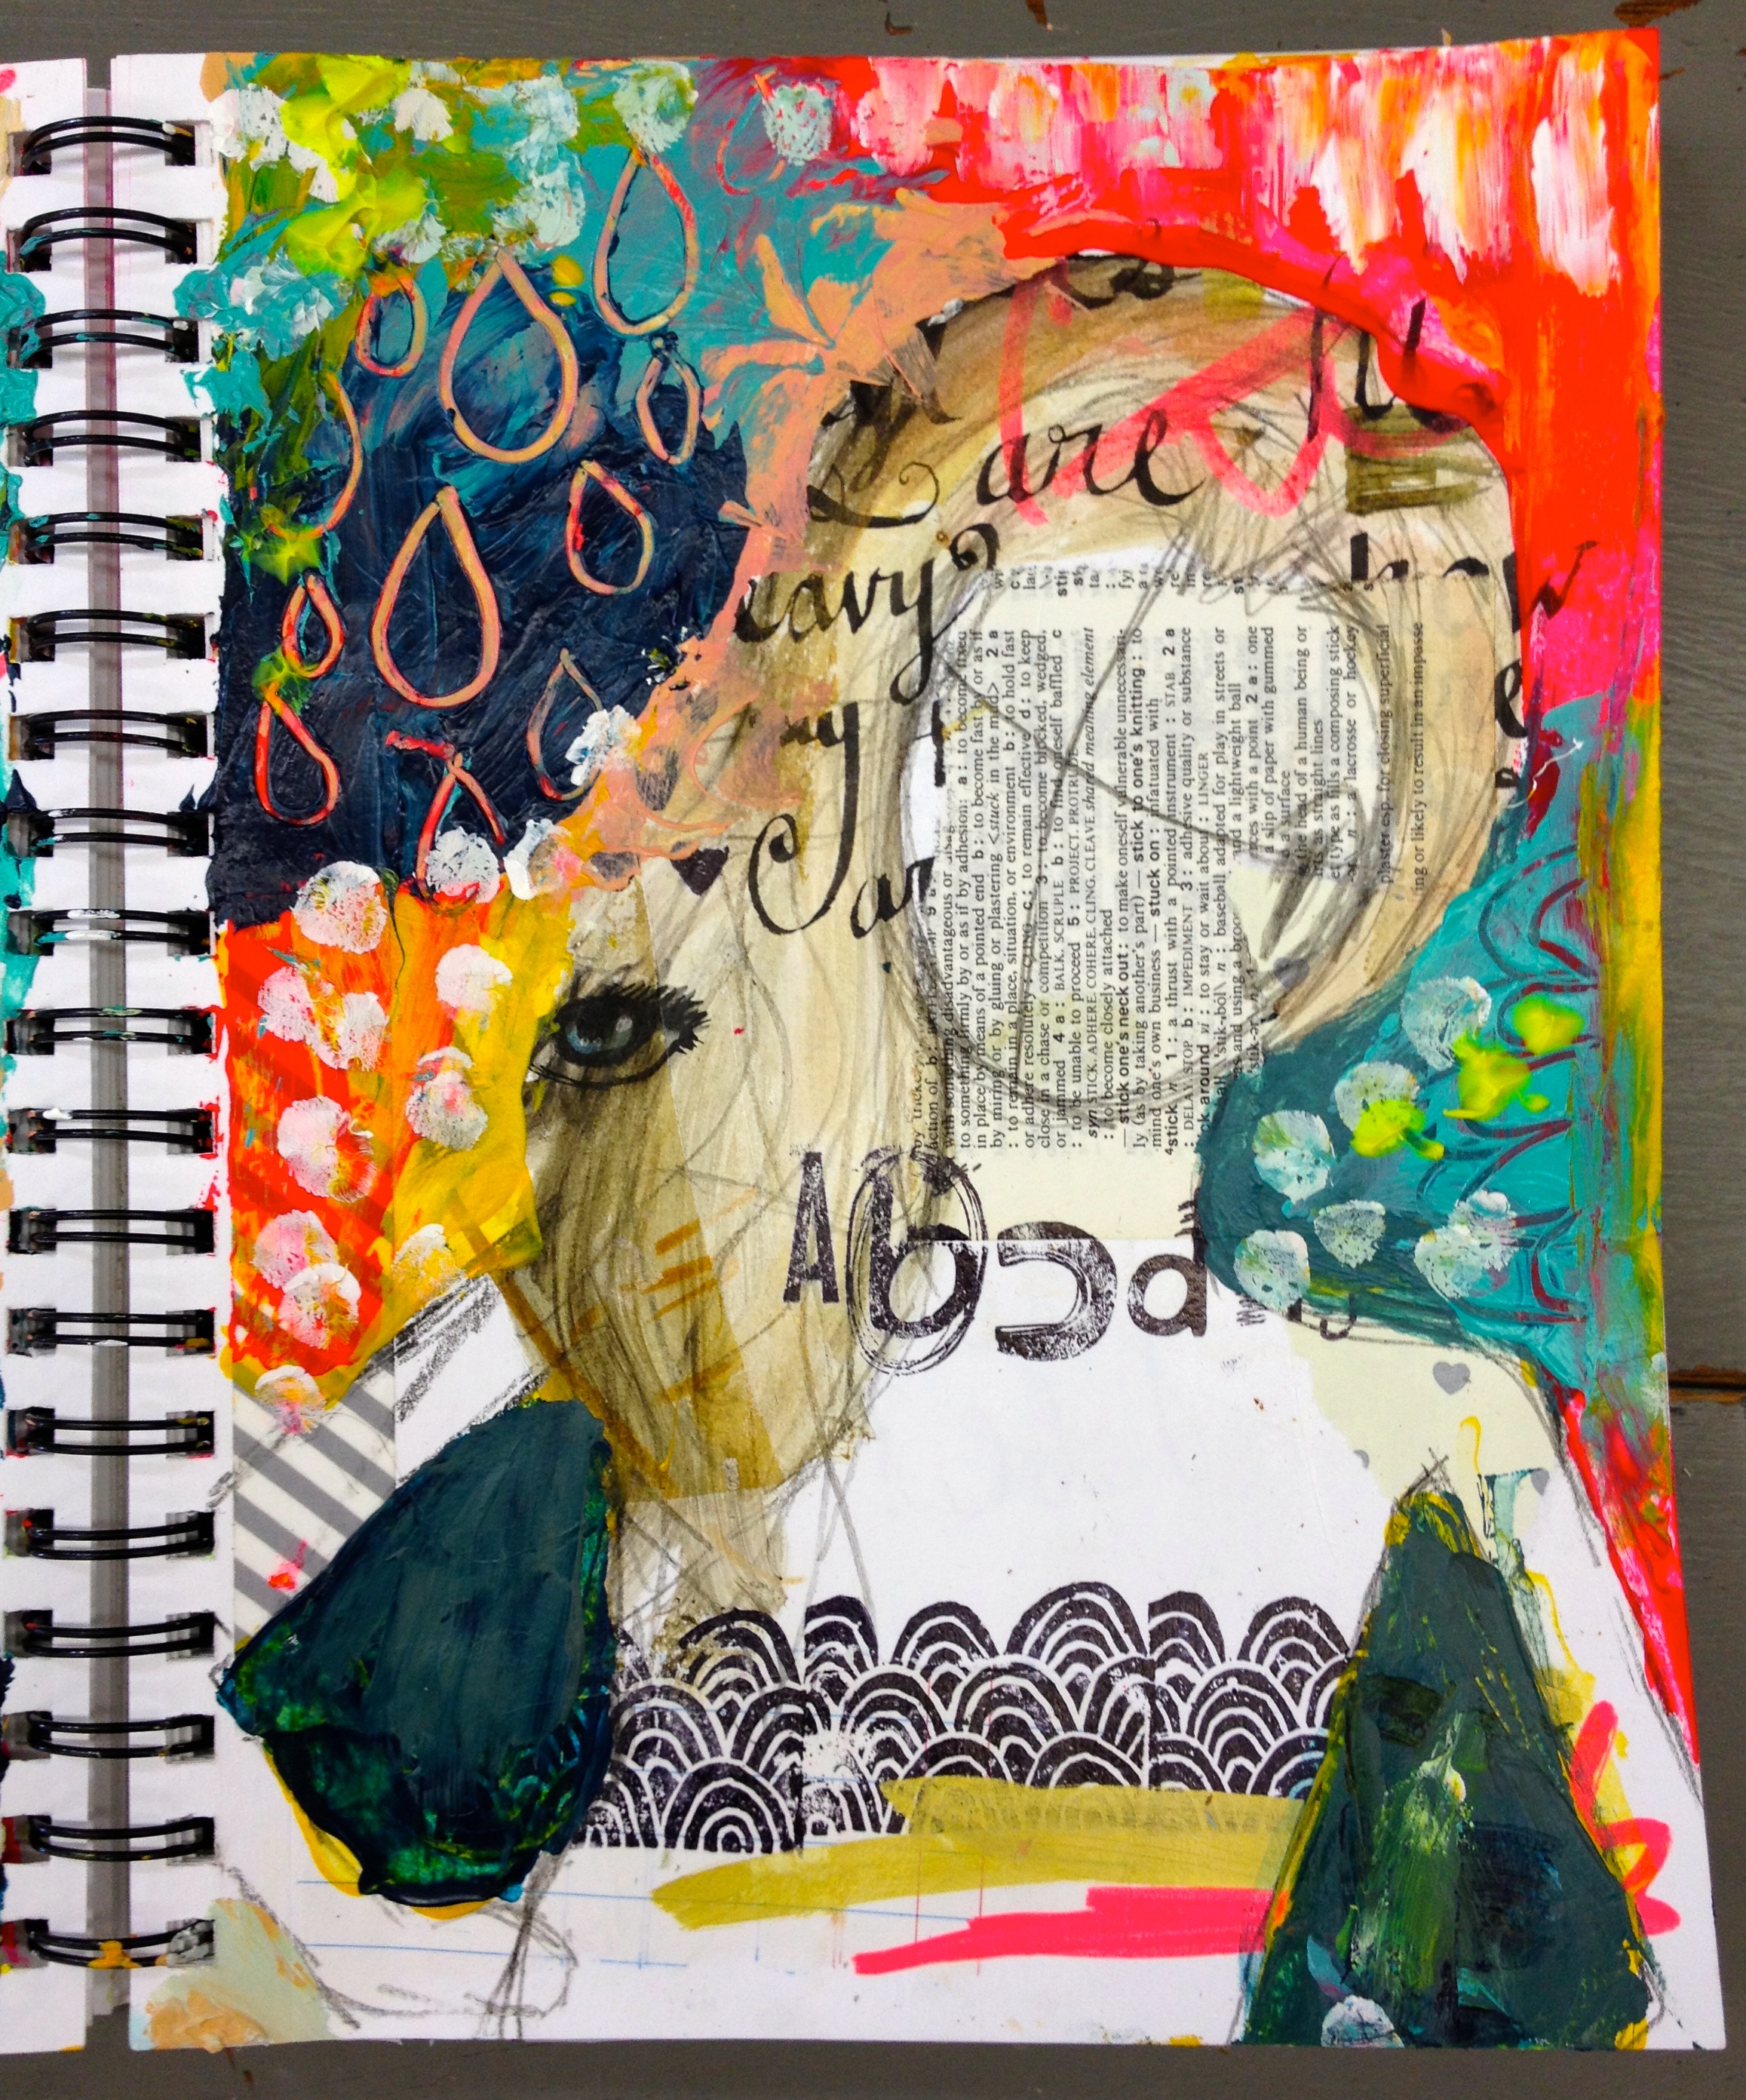 Top 5 Art Journal Supplies You Should Have In Your Stash - Artful Haven